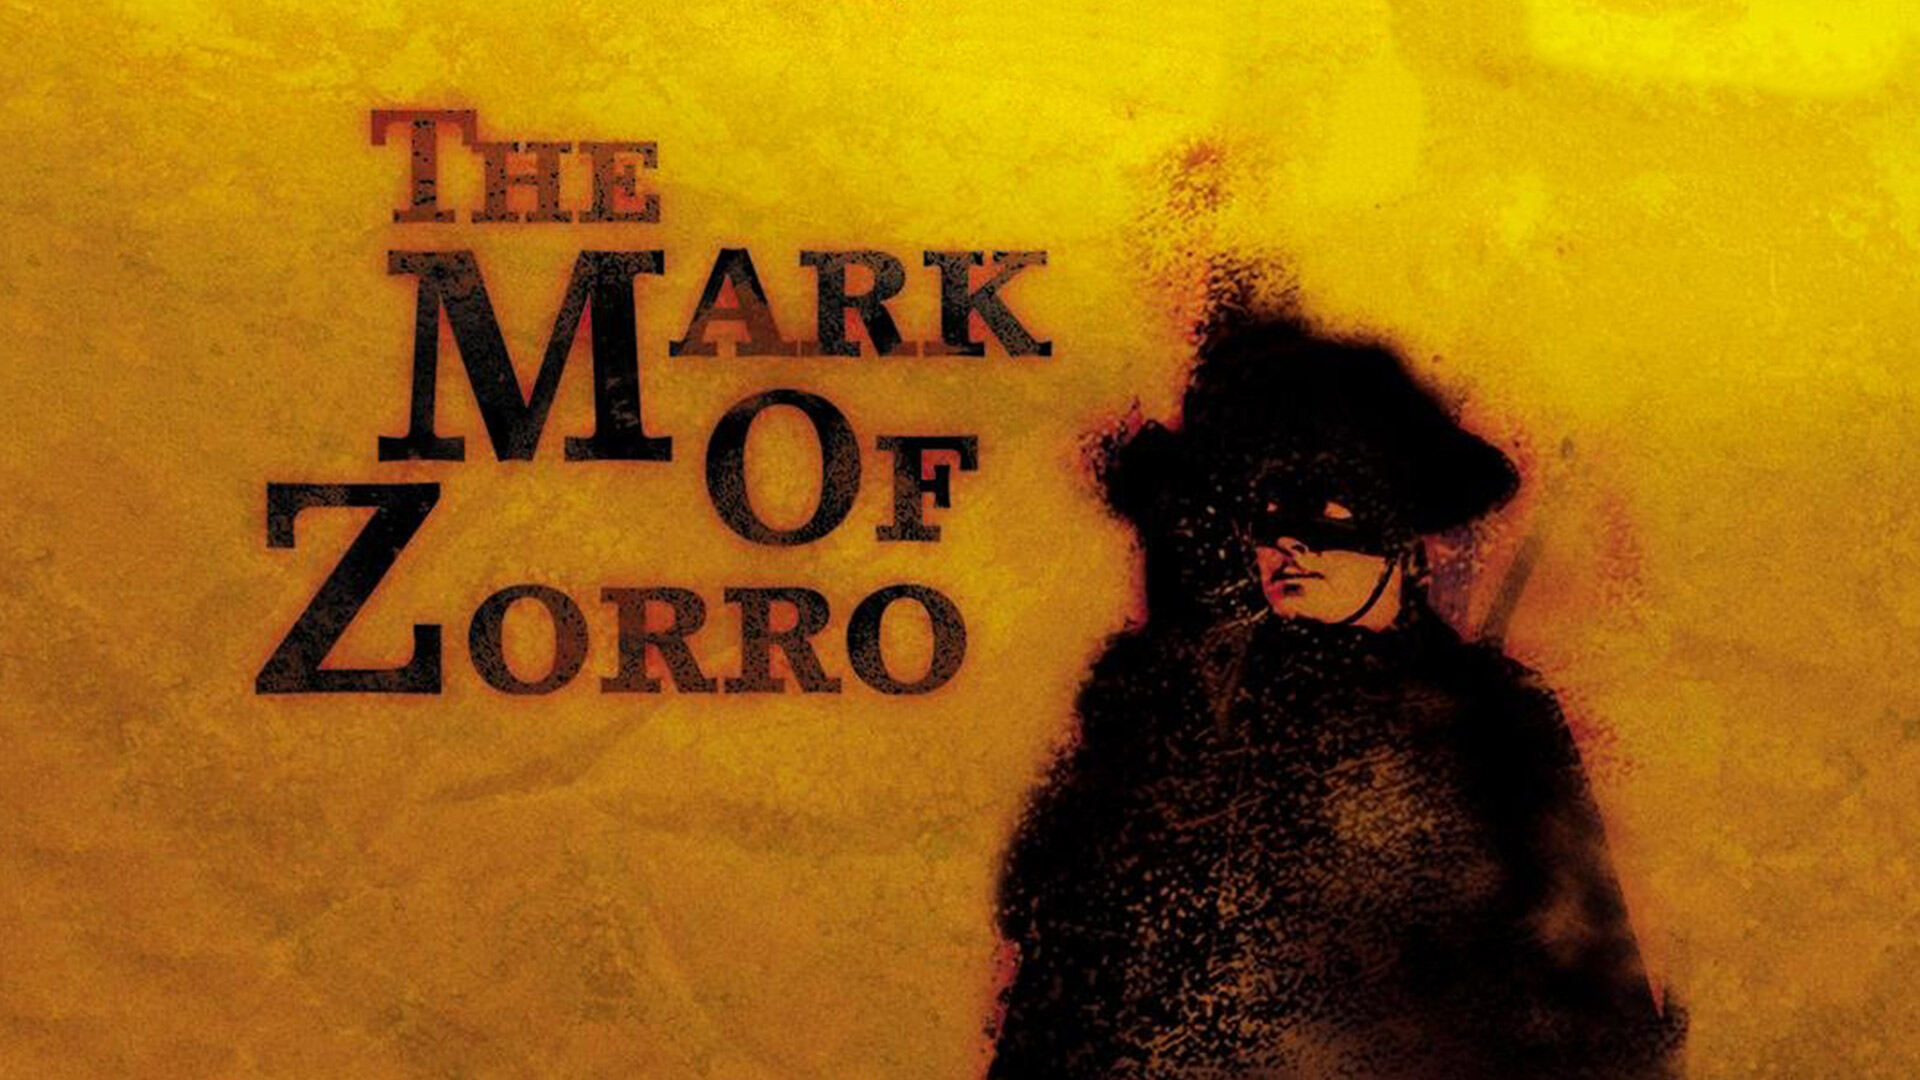 44-facts-about-the-movie-the-mark-of-zorro